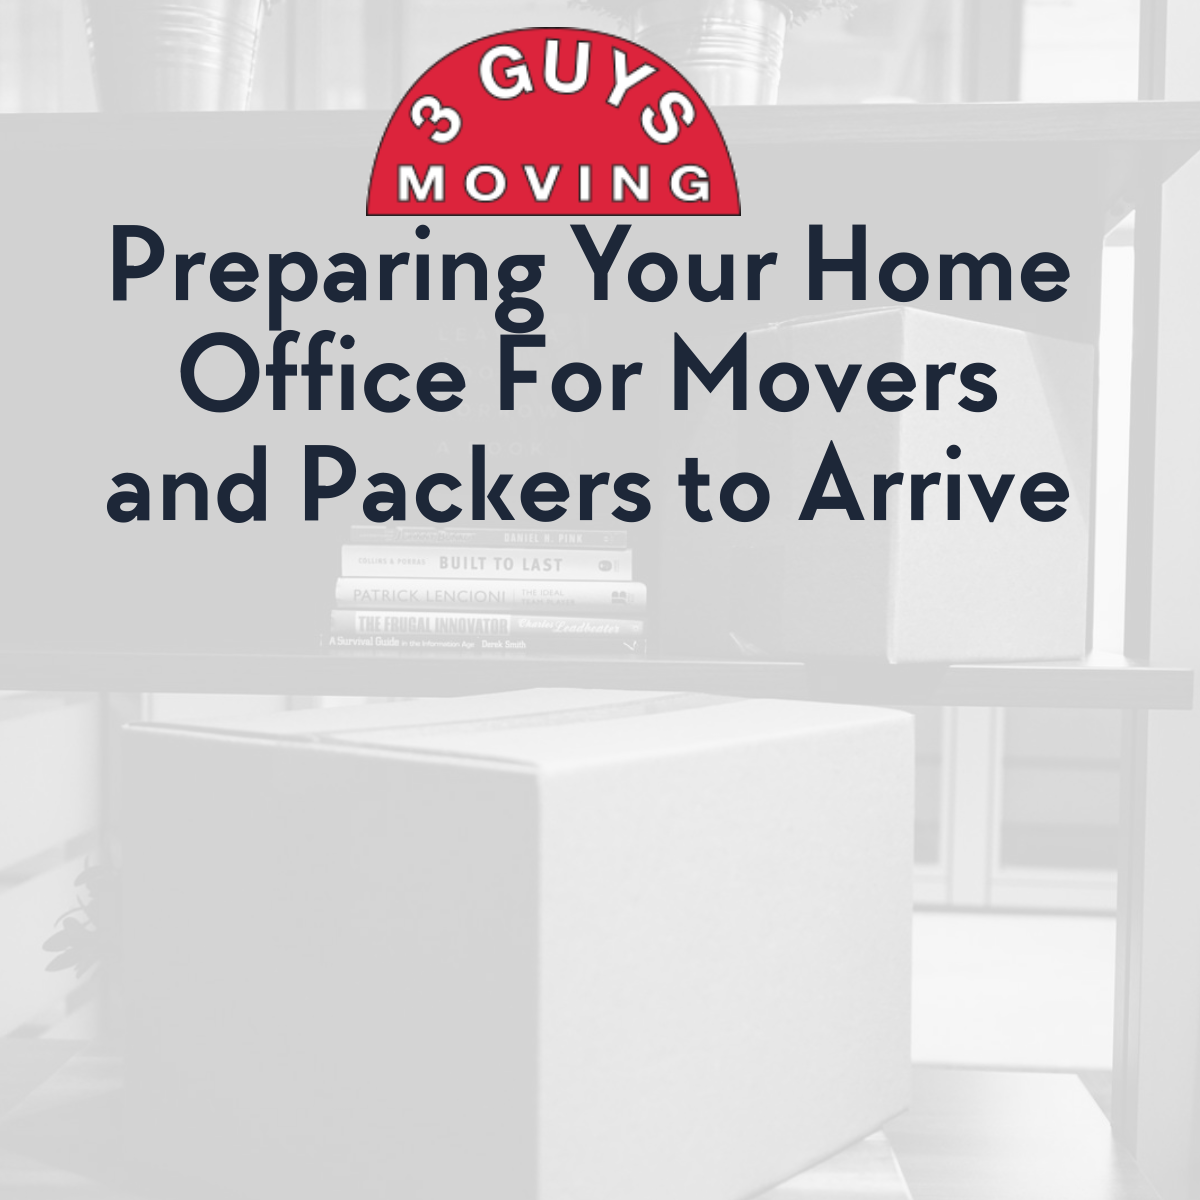 Preparing Your Home Office For Movers and Packers to Arrive - Preparing Your Home Office For Movers and Packers to Arrive